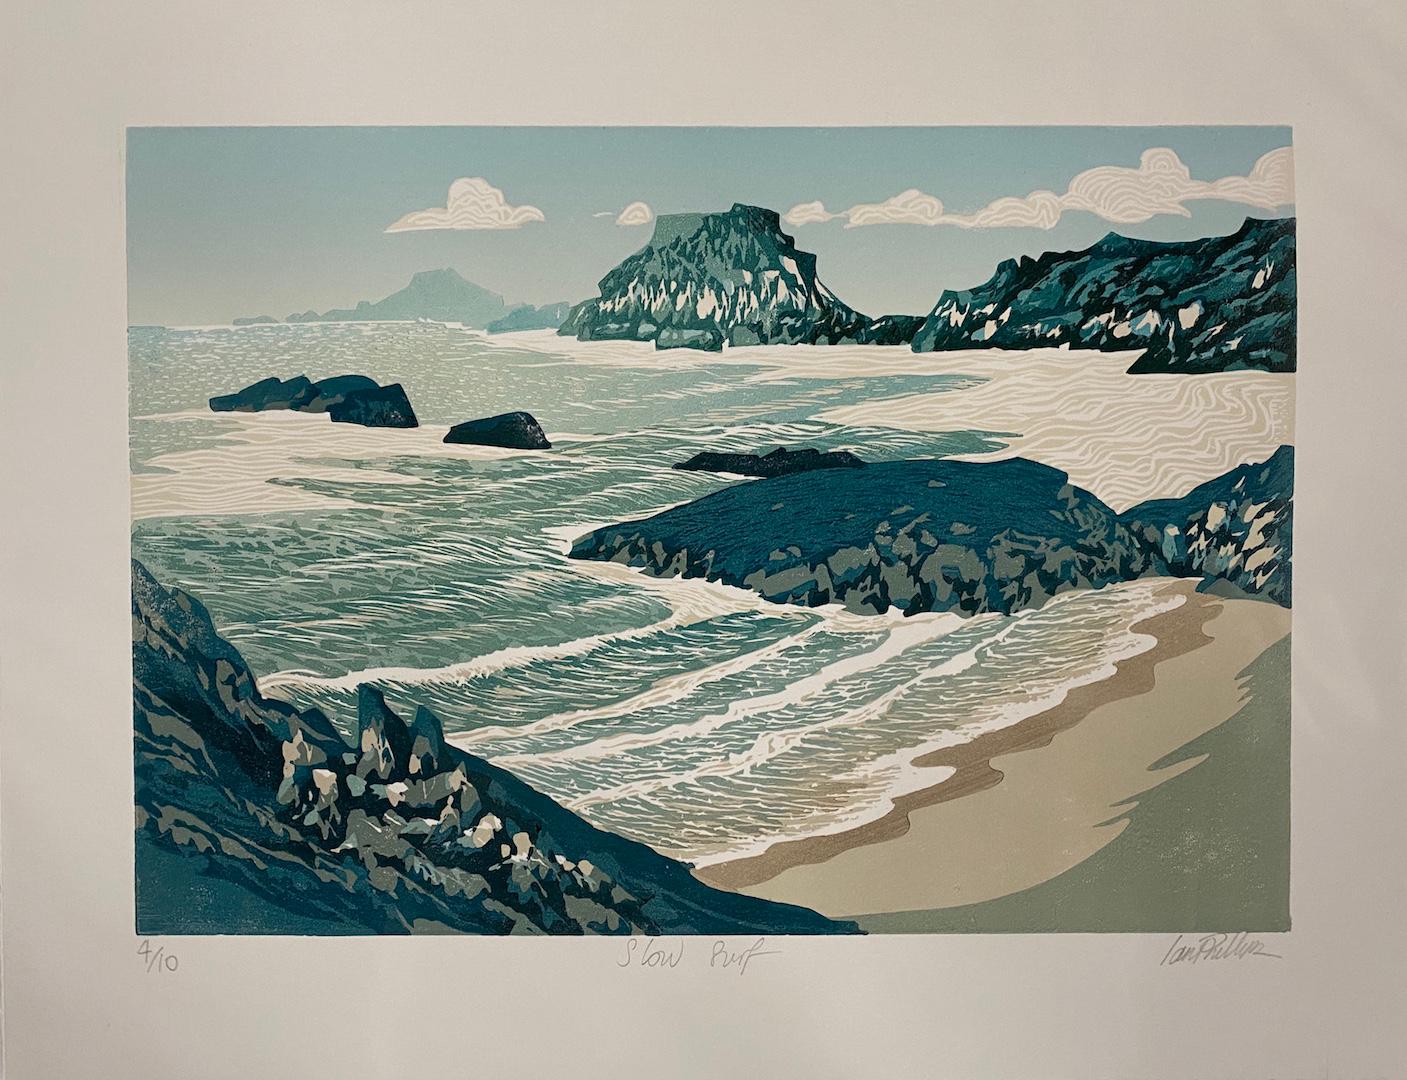 Ian Phillips
Slow Surf
Limited Edition Reduction Linocut Print on Paper
Edition of 10
Image Size: H 28cm x W 40cm
Sheet Size: H 38cm x W 50cm
Sold Unframed
Please note that in situ images are purely an indication of how a piece may look.

Slow Surf